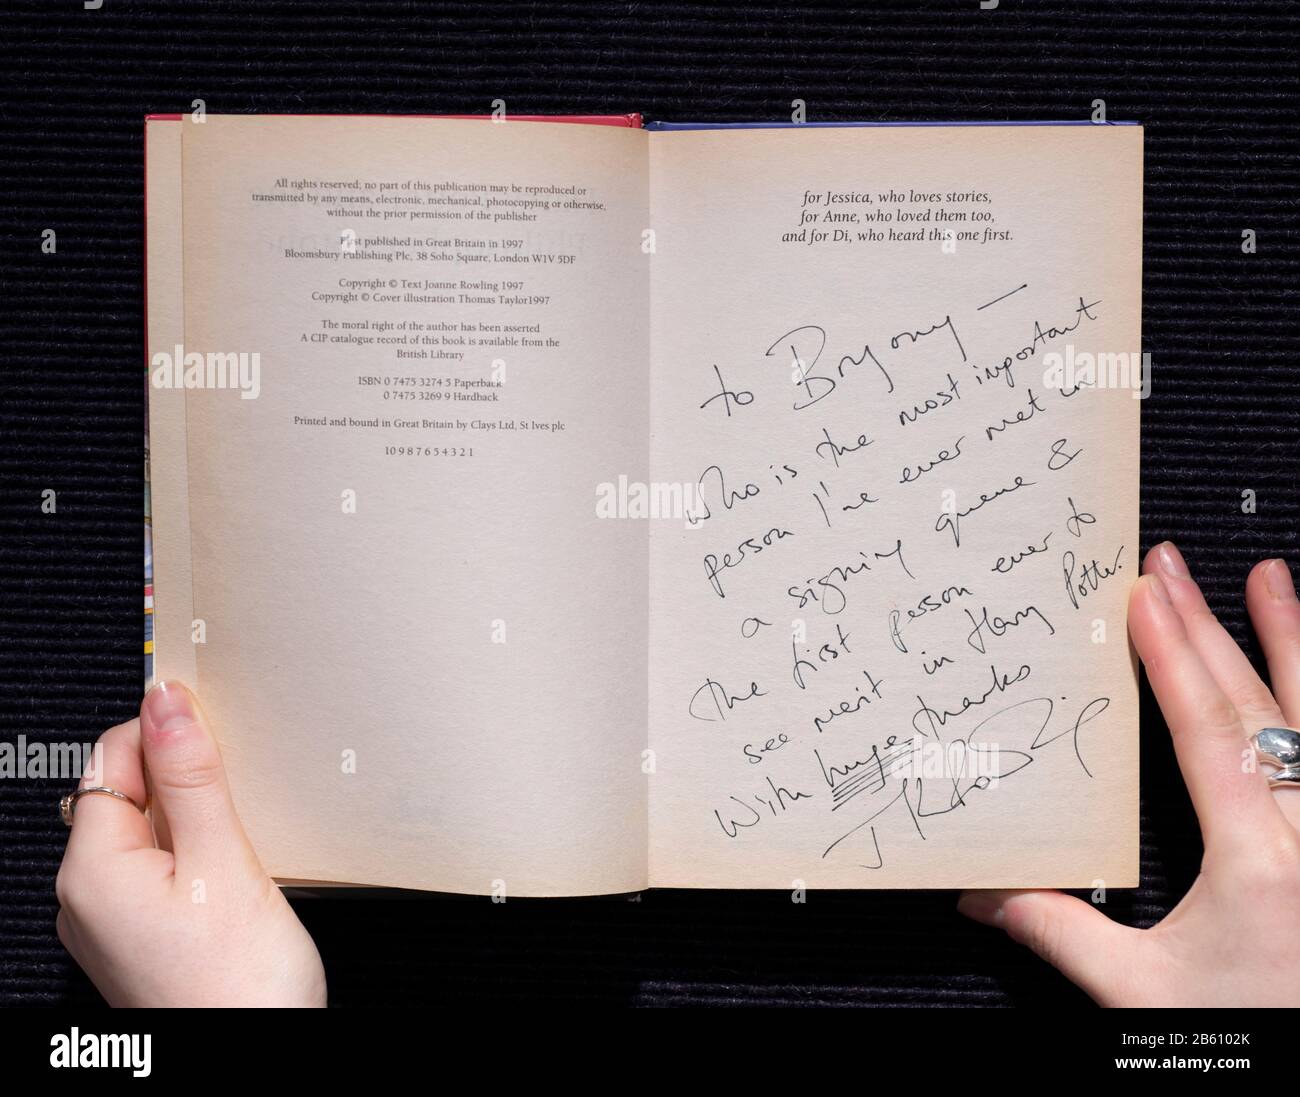 Bonhams, London, UK. 9th March 2020. Fine Books, Atlases, Manuscripts & Historical Photographs on preview prior to the sale in London on 11 March 2020. Image: J.K. Rowling. Harry Potter and the Philosopher's Stone, First Edition, First Impression, inscribed by the Author 'to Bryony... the first person ever to see merit in Harry Potter. With huge [underlined 4 times] thanks. J.K. Rowling', Bloomsbury, 1997, estimate £70,000-90,000. Credit: Malcolm Park/Alamy Live News. Stock Photo